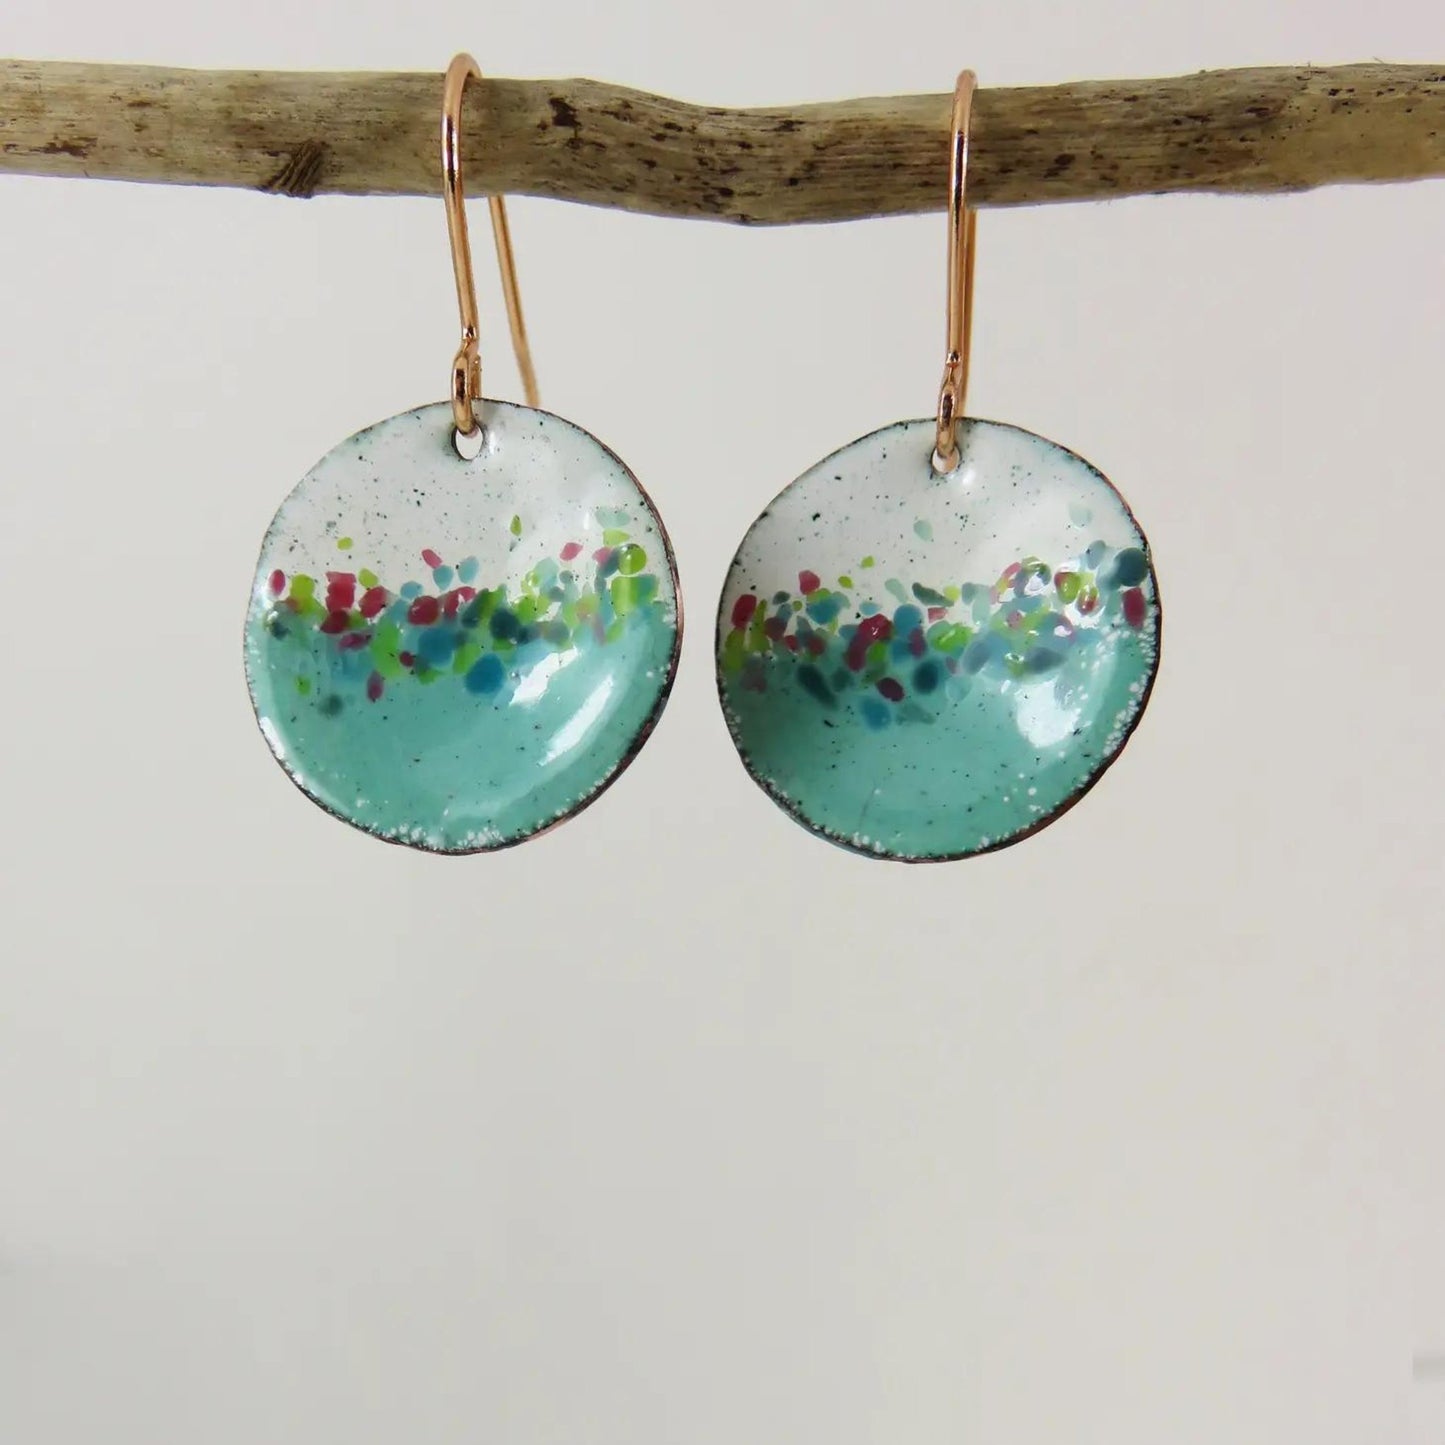 Earrings in Jade and White with Colourful Glass Sprinkles - The Little Jewellery Company